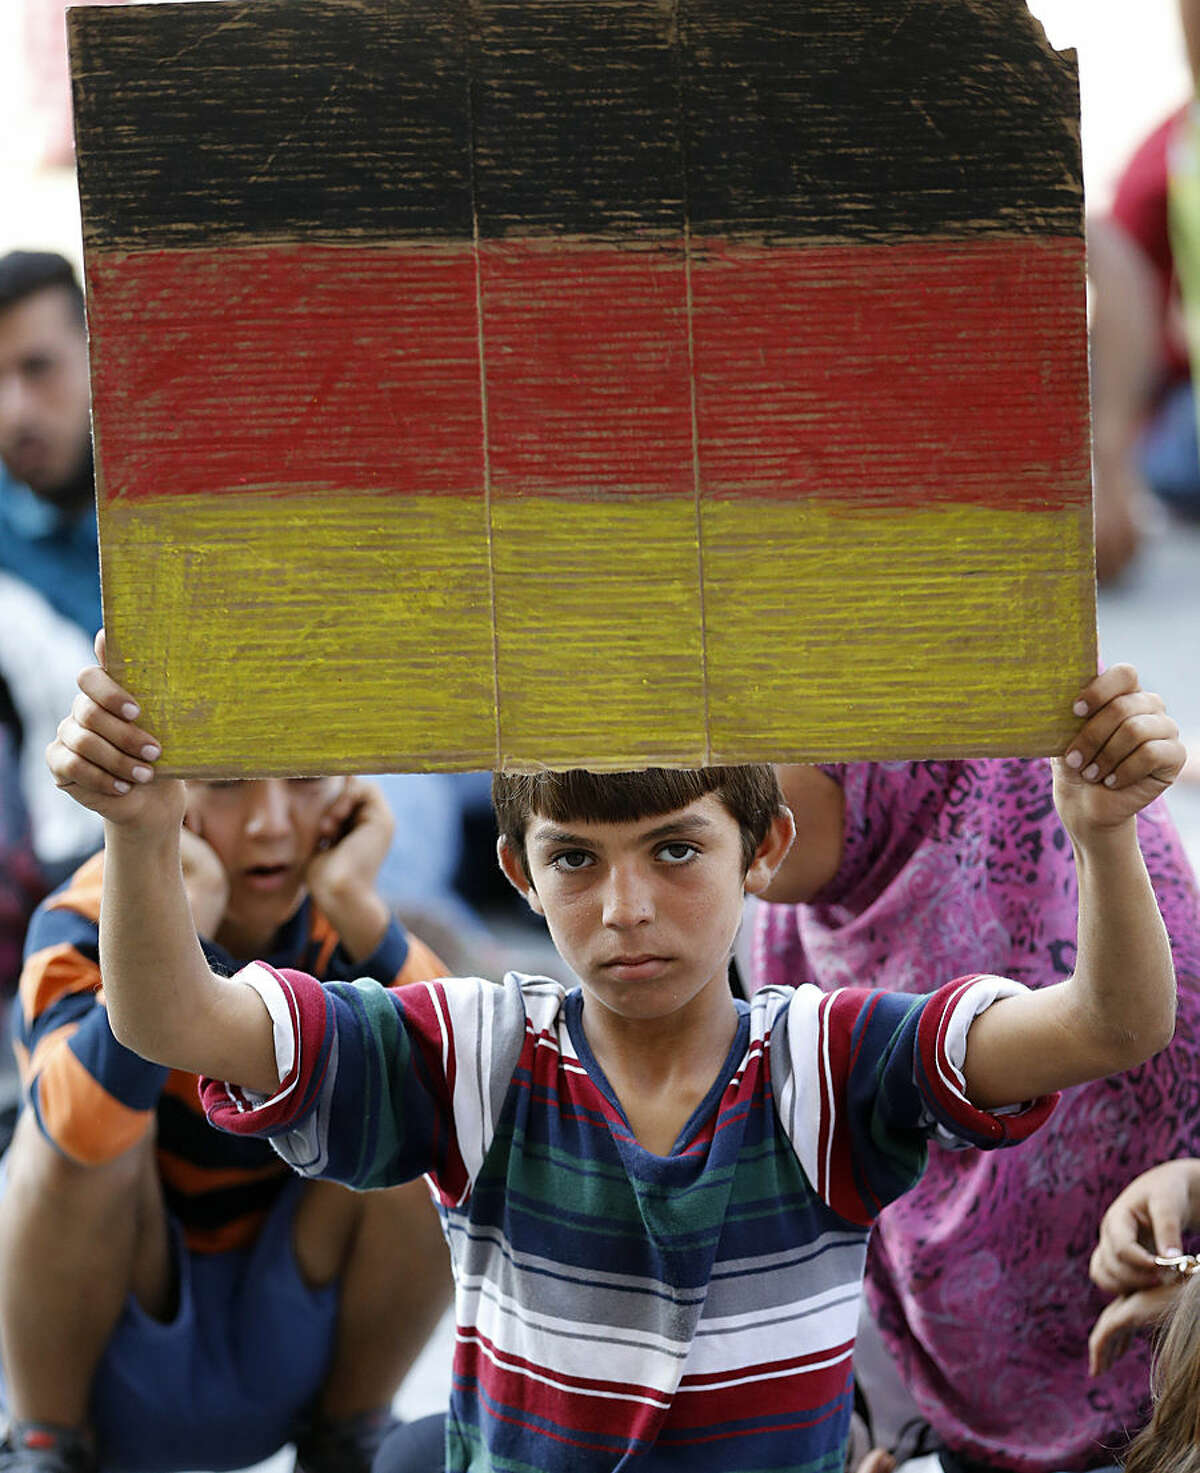 A young boy holds a German flag in front of the railway station in Budapest, Hungary, Thursday, Sept. 3, 2015. Over 150,000 migrants have reached Hungary this year, most coming through the southern border with Serbia, and many apply for asylum but quickly try to leave for richer EU countries.(AP Photo/Frank Augstein)